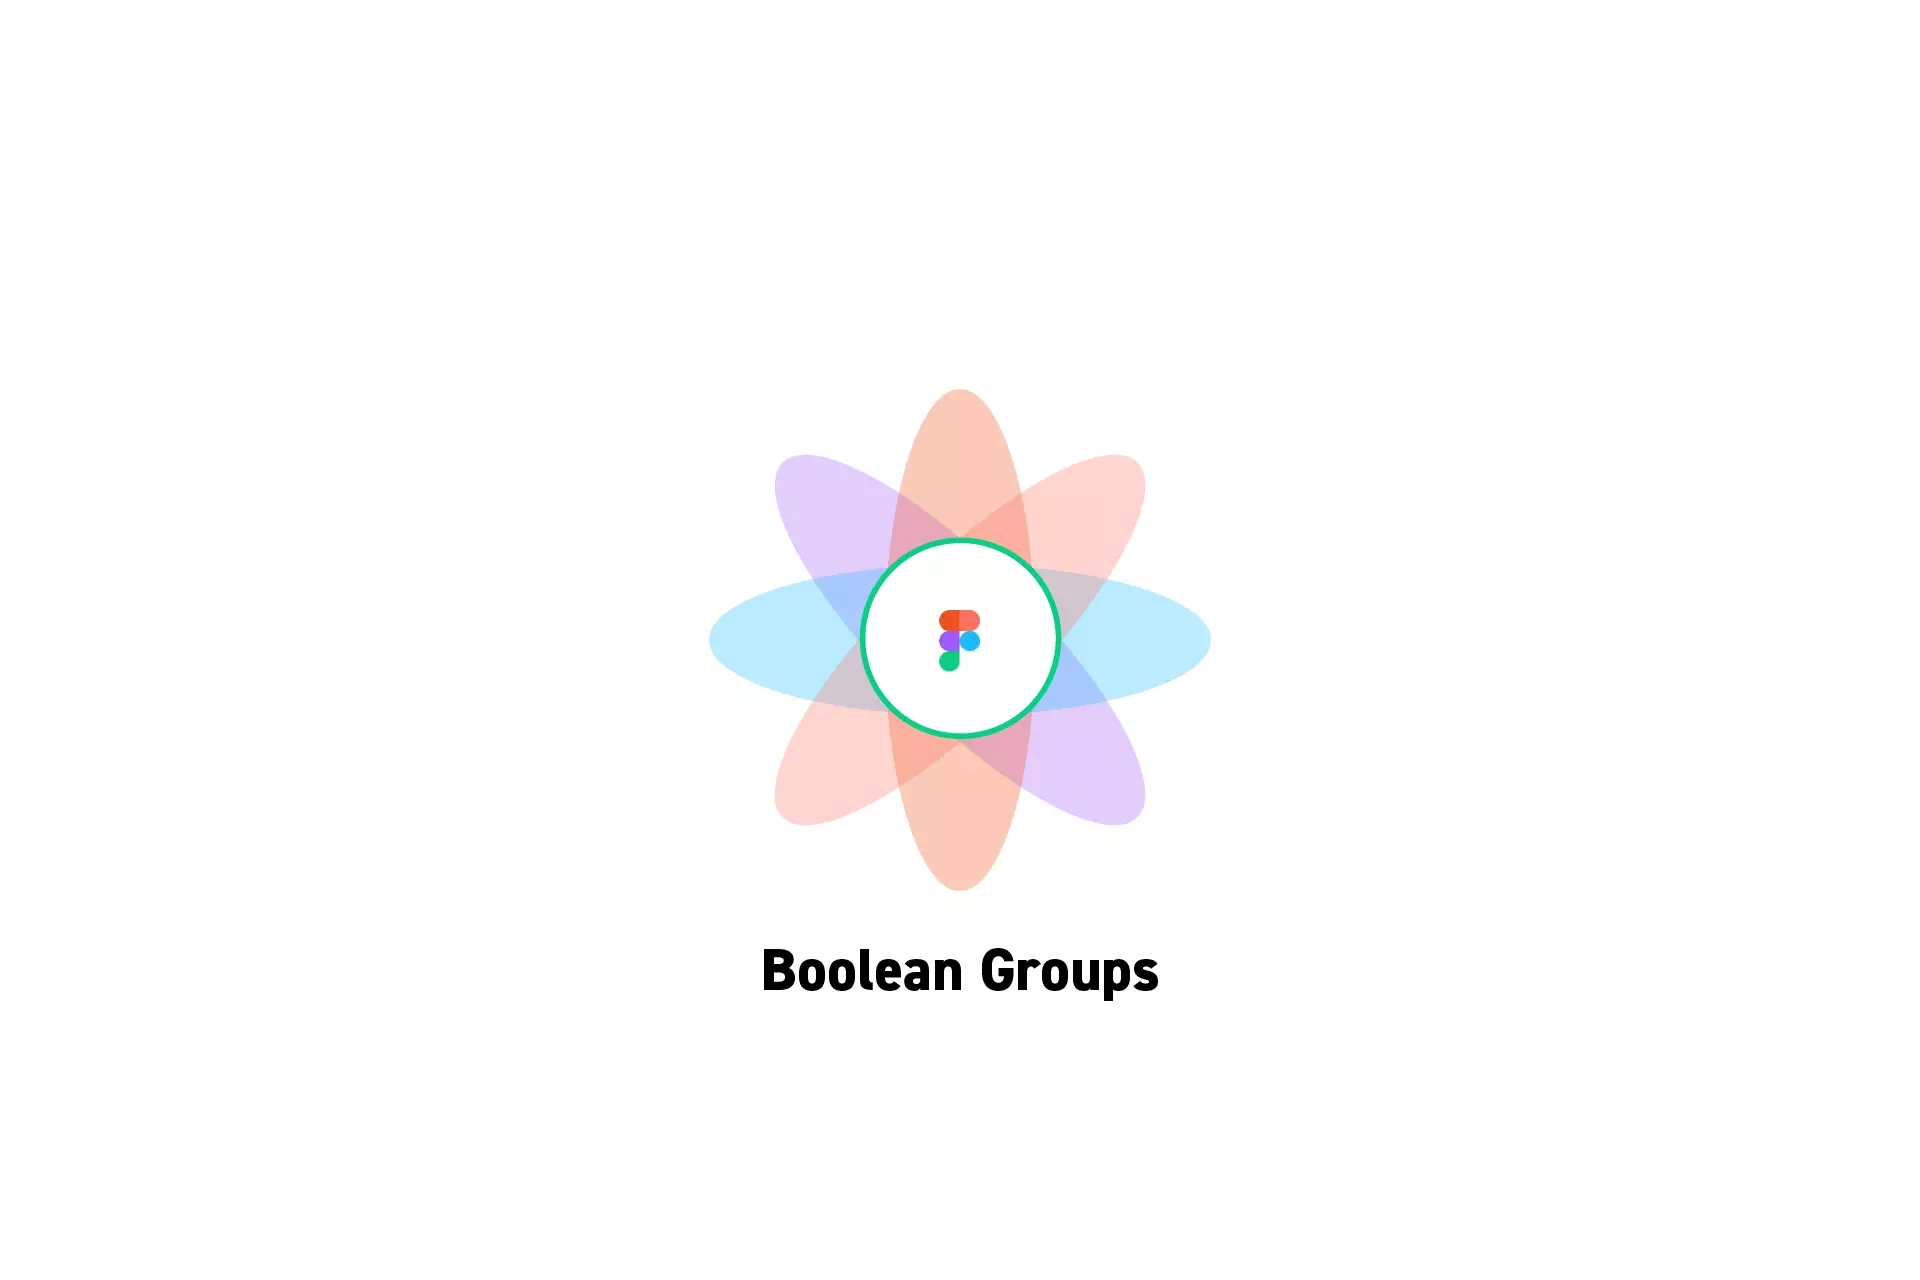 A flower that represents Figma with the text “Boolean Groups” beneath it.